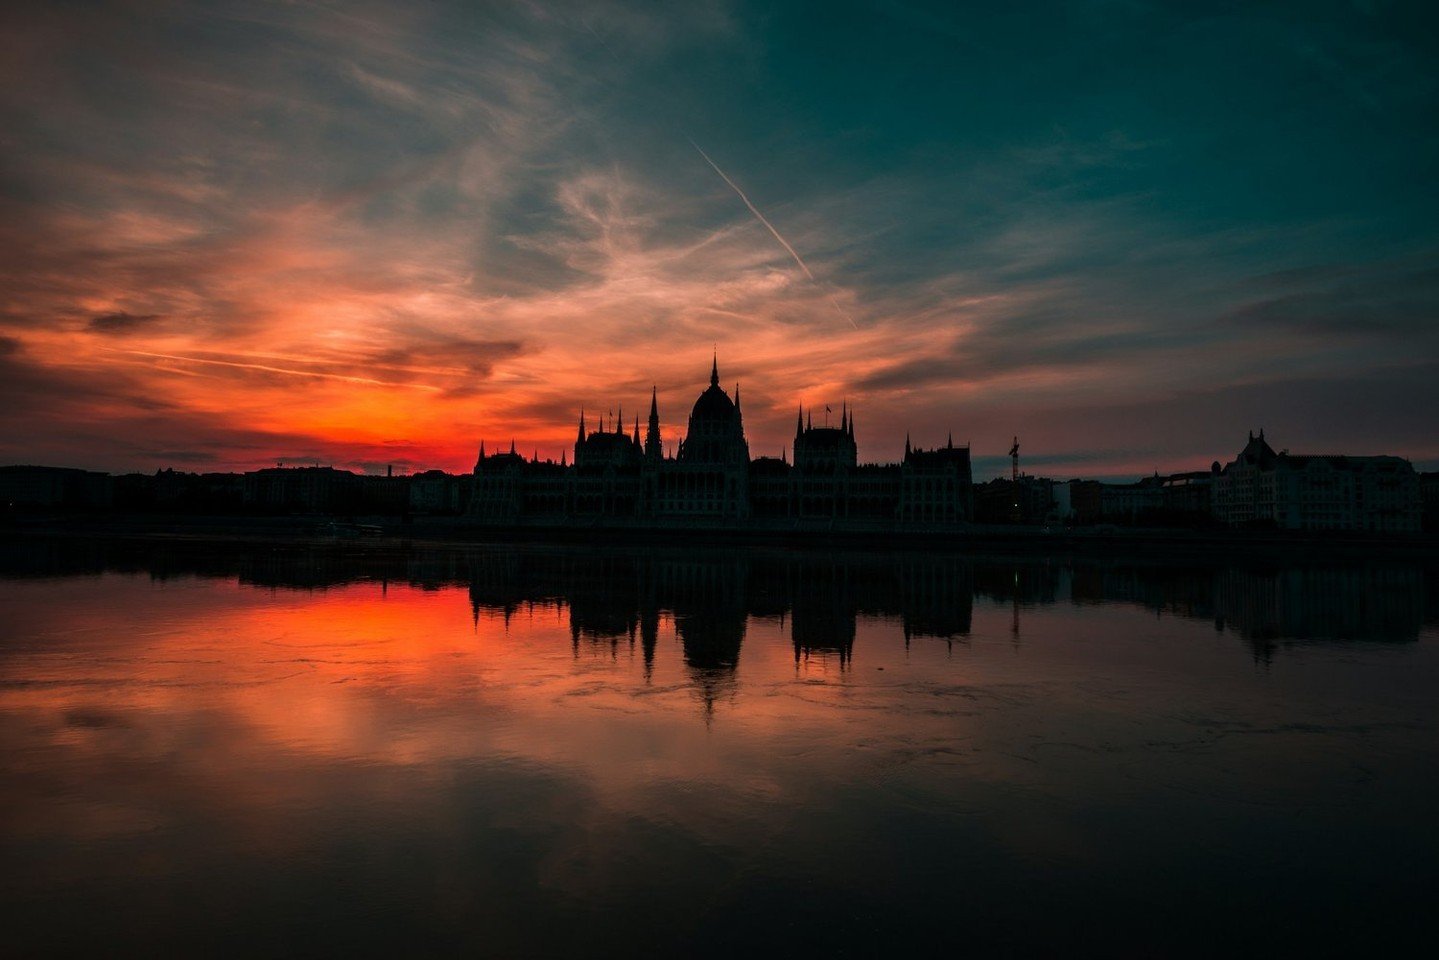 Sunset in Budapest
#budapest #sunset #photography #slowtravel #luxury
.
https://www.msecchi.com/blogmarco/capturing-the-magic-sunset-in-budapest